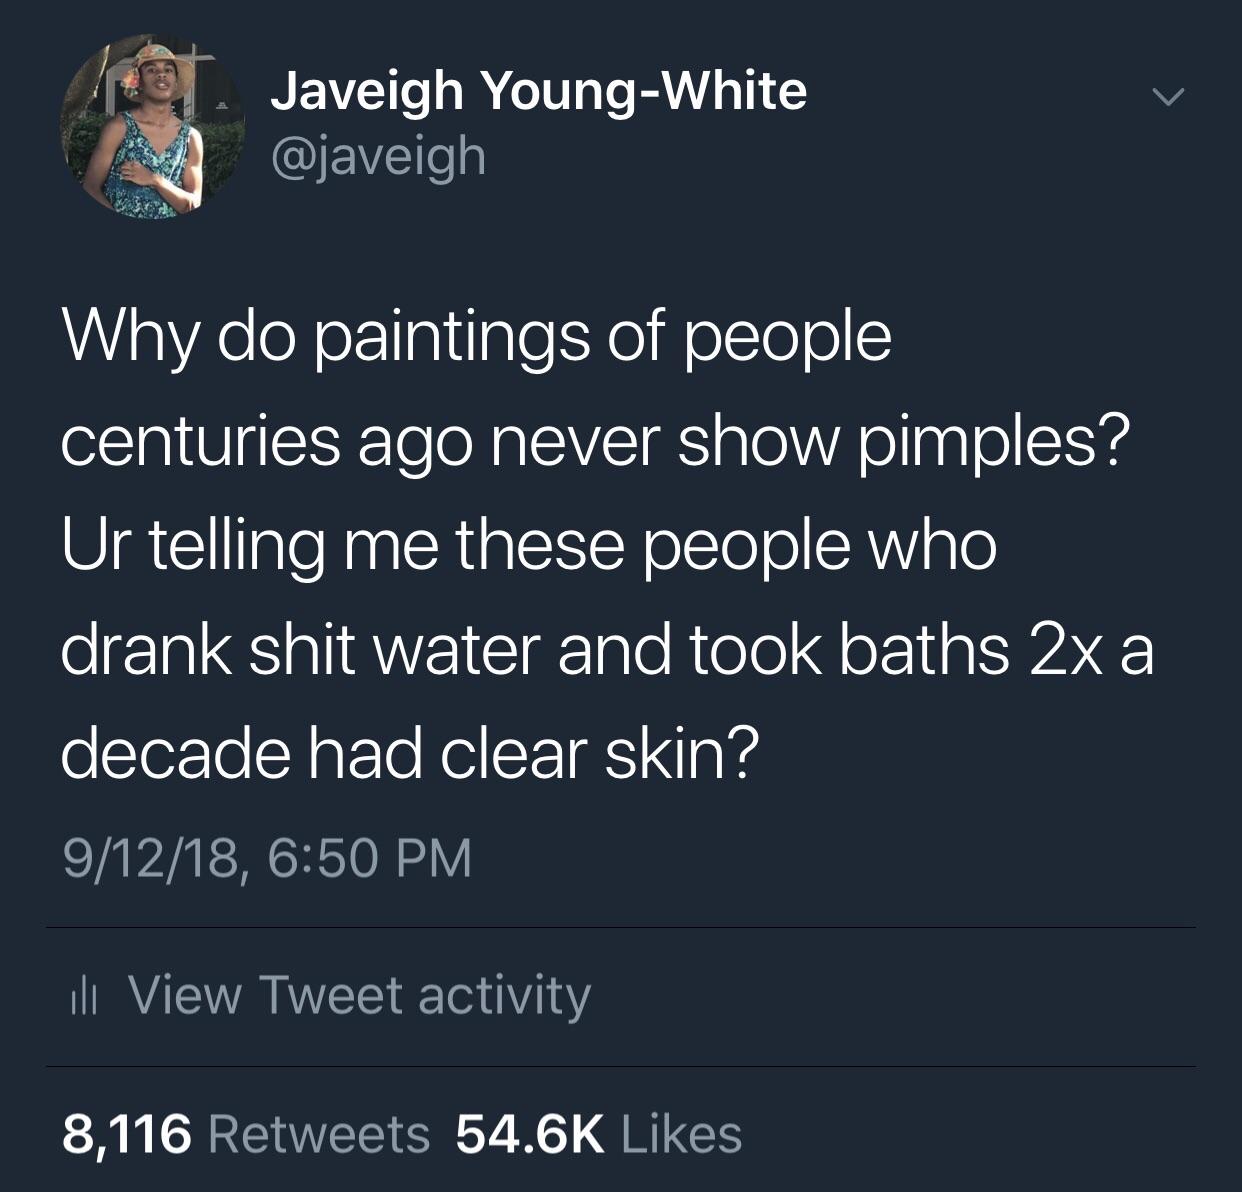 memes - Donald Trump - Javeigh YoungWhite Why do paintings of people centuries ago never show pimples? Ur telling me these people who drank shit water and took baths 2x a decade had clear skin? 91218, Lili View Tweet activity 8,116